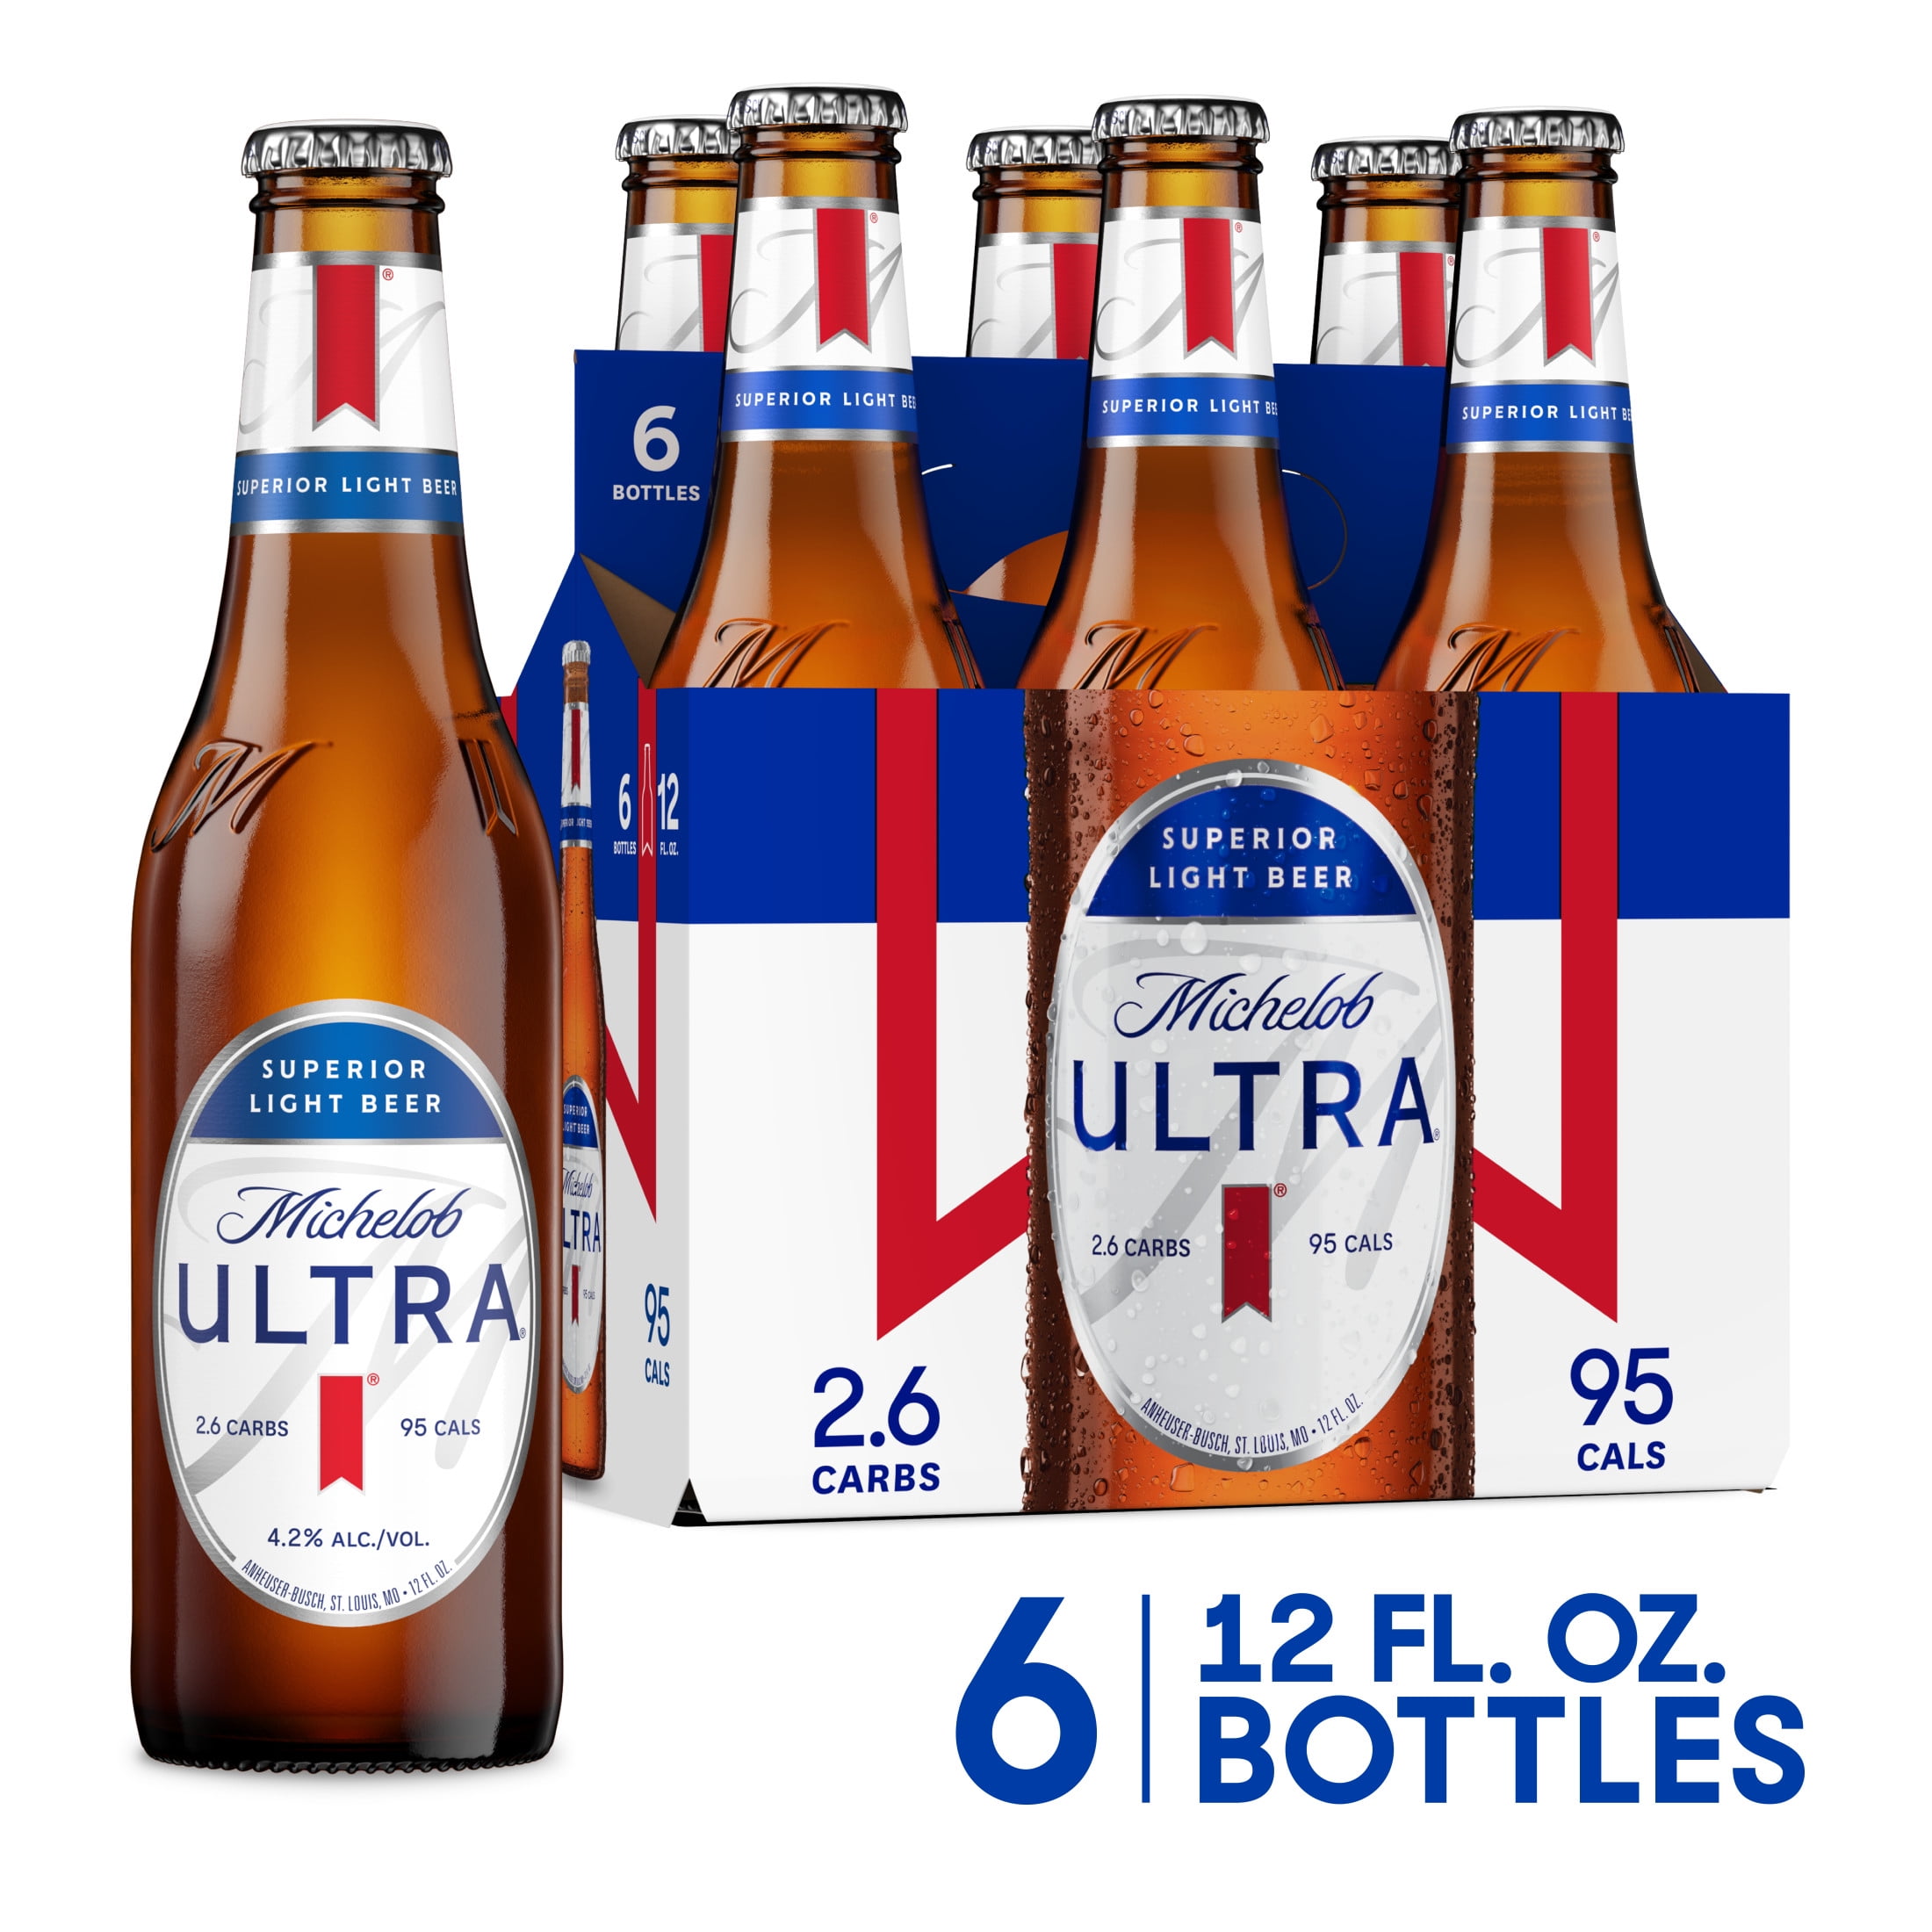 Michelob Ultra Superior Light Lager